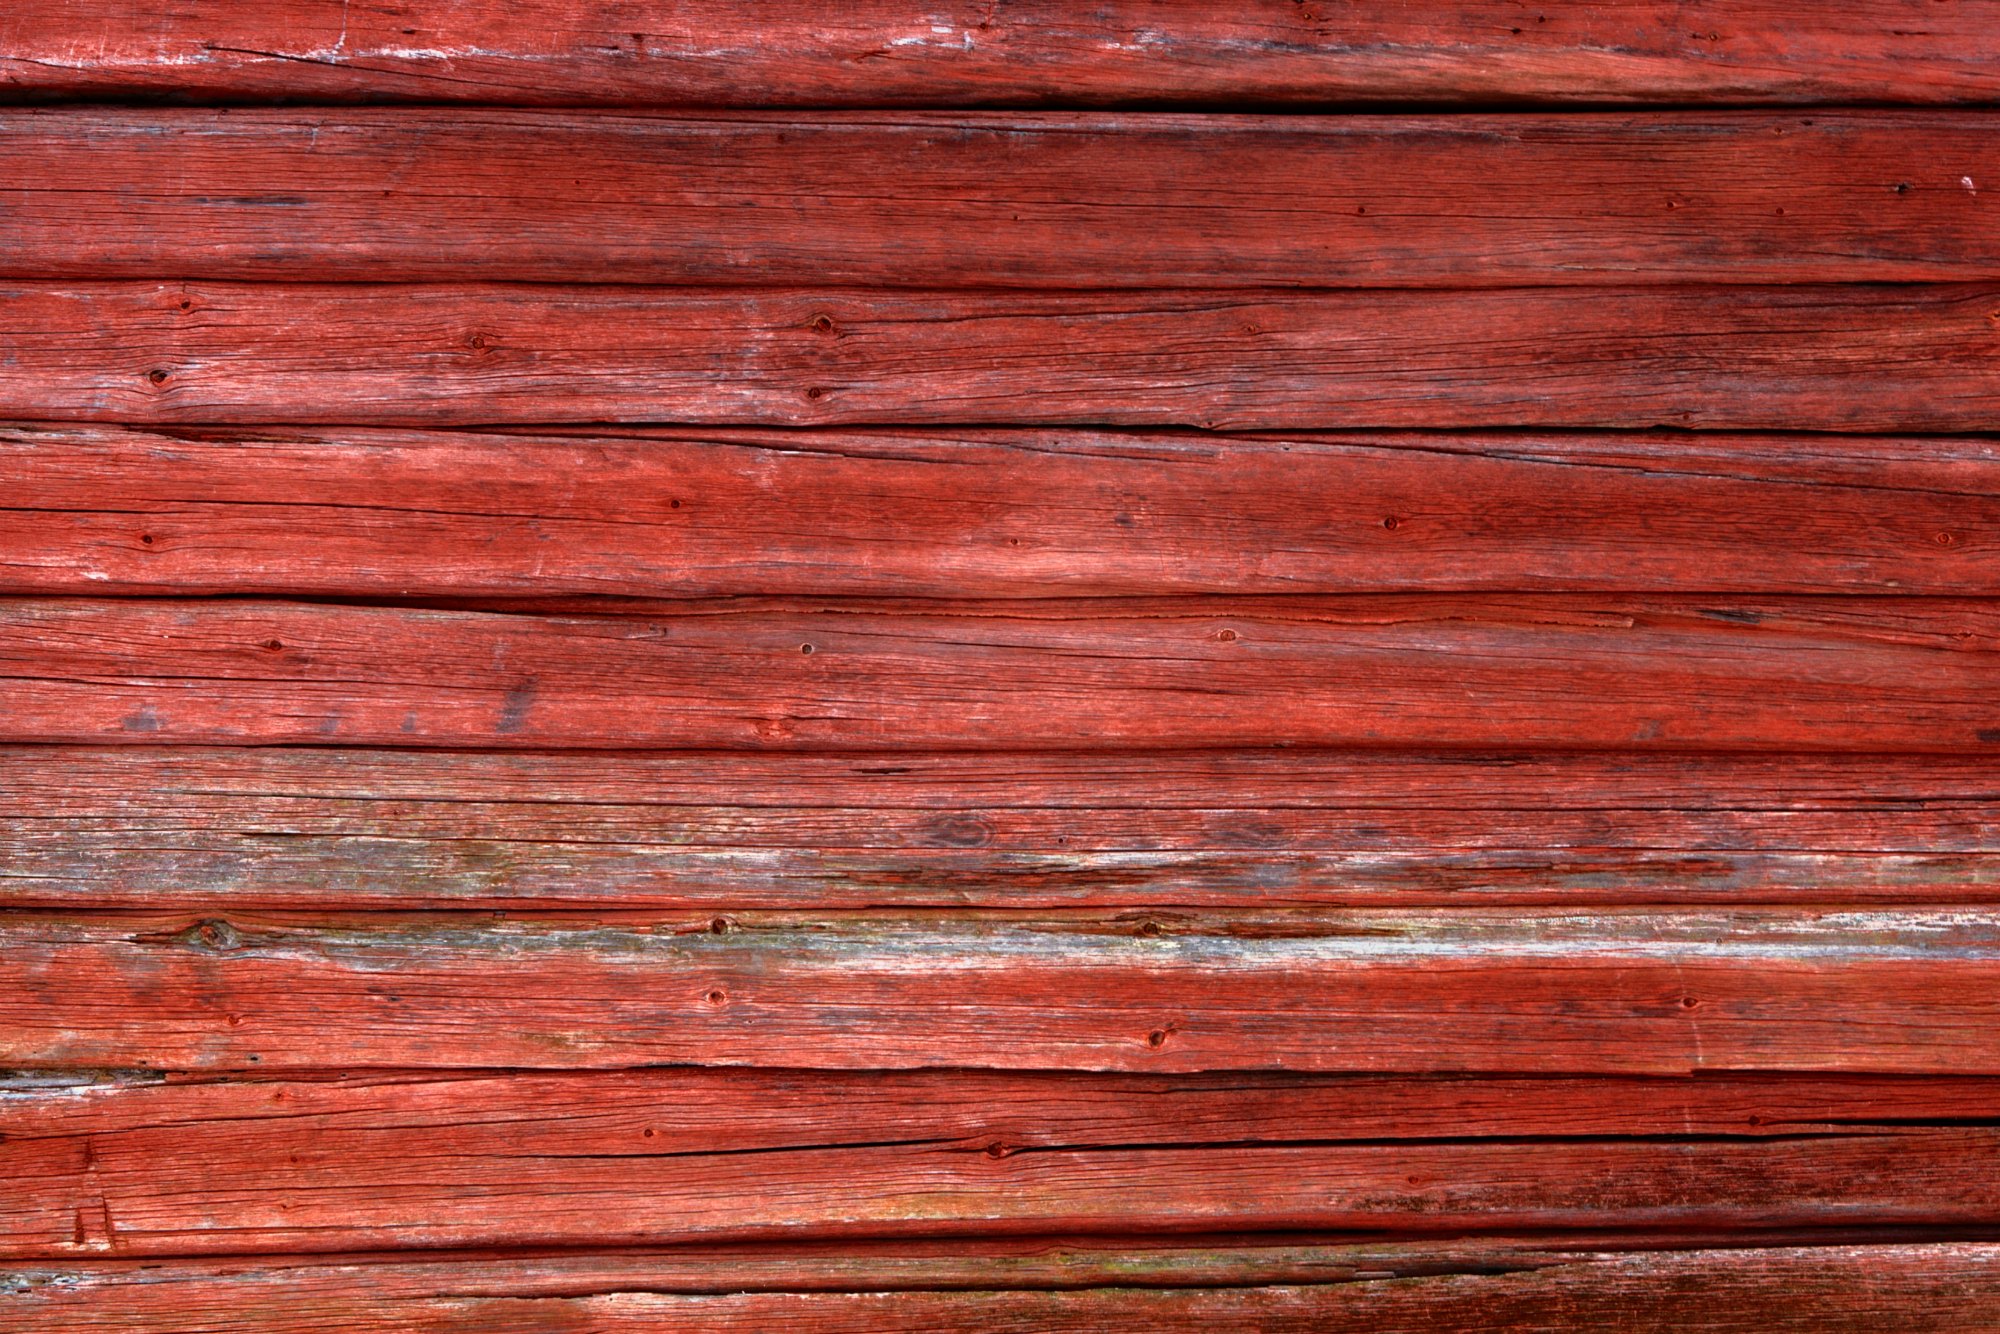 Barn Wood Background And Distressed